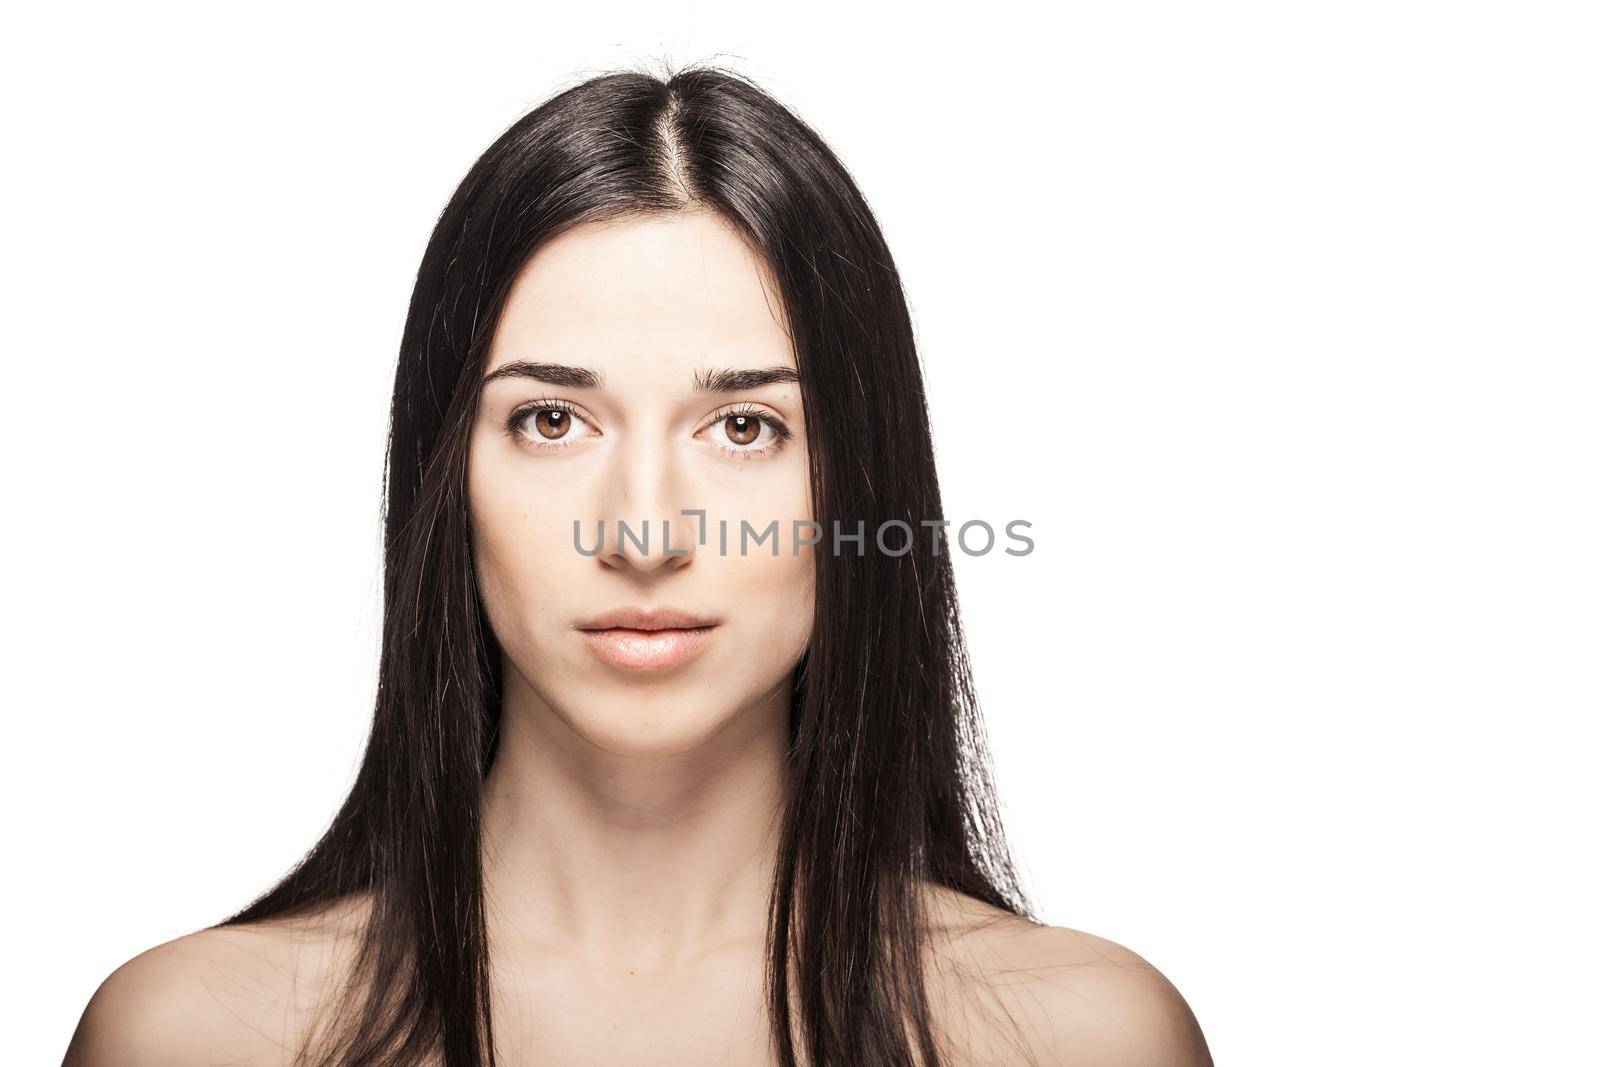 studio portrait of a beautiful young girl against white backgroung. looking at camera.